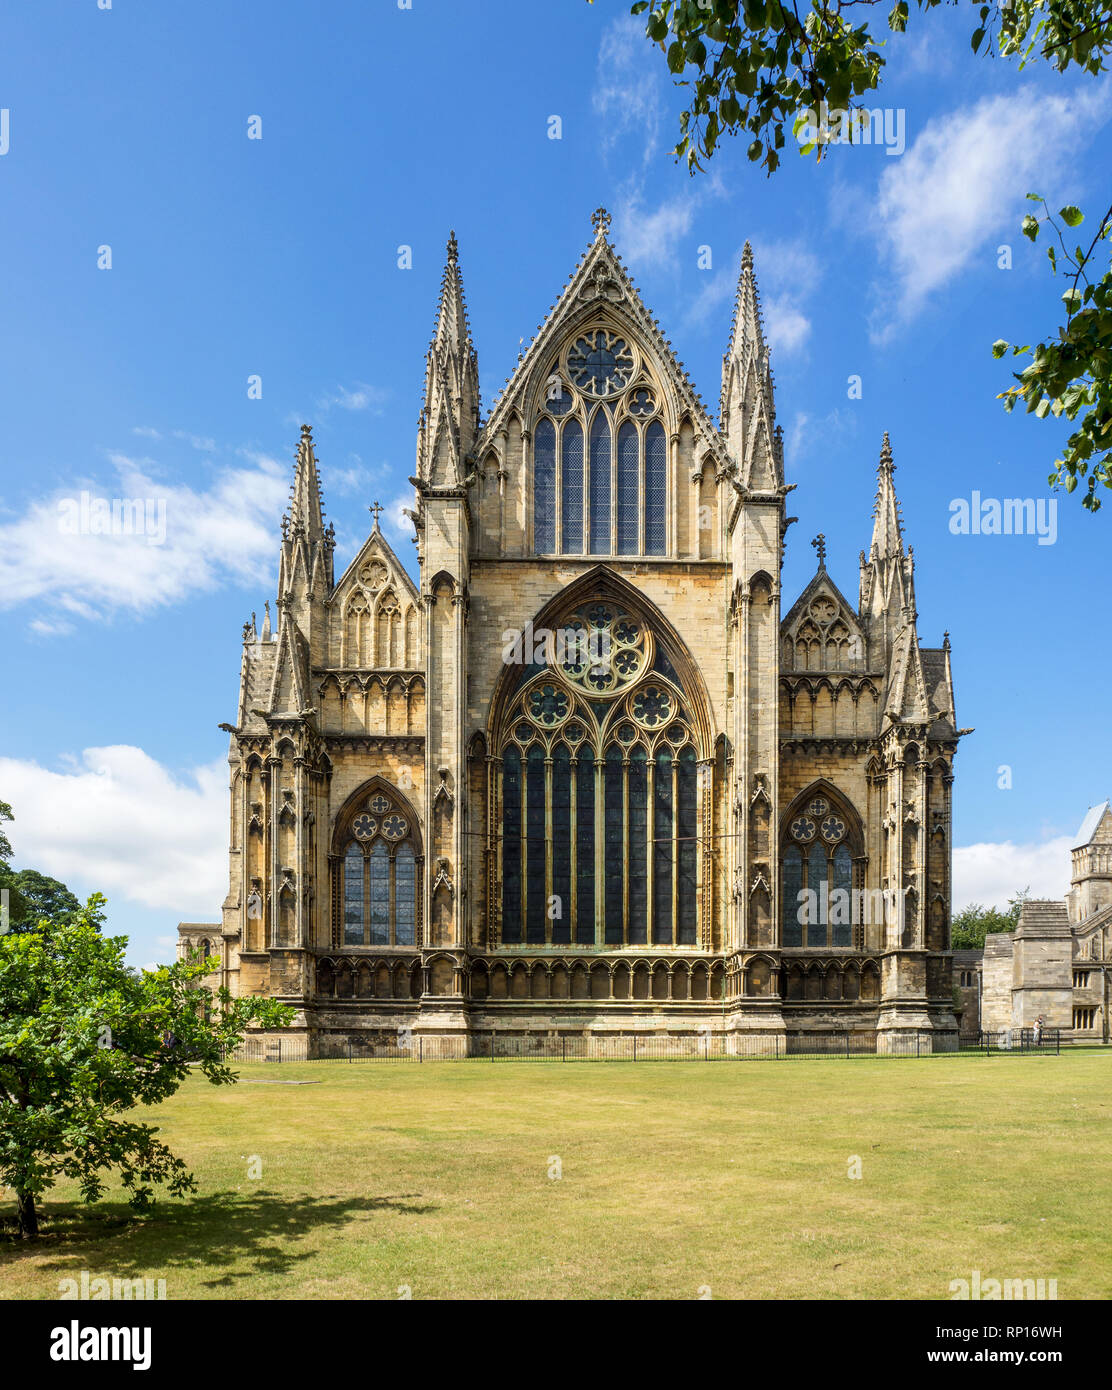 Gothic cathedral in Lincoln, Lincolnshire, England, UK. Presbytery with rosettes and lancet windows with stained glass. Stock Photo